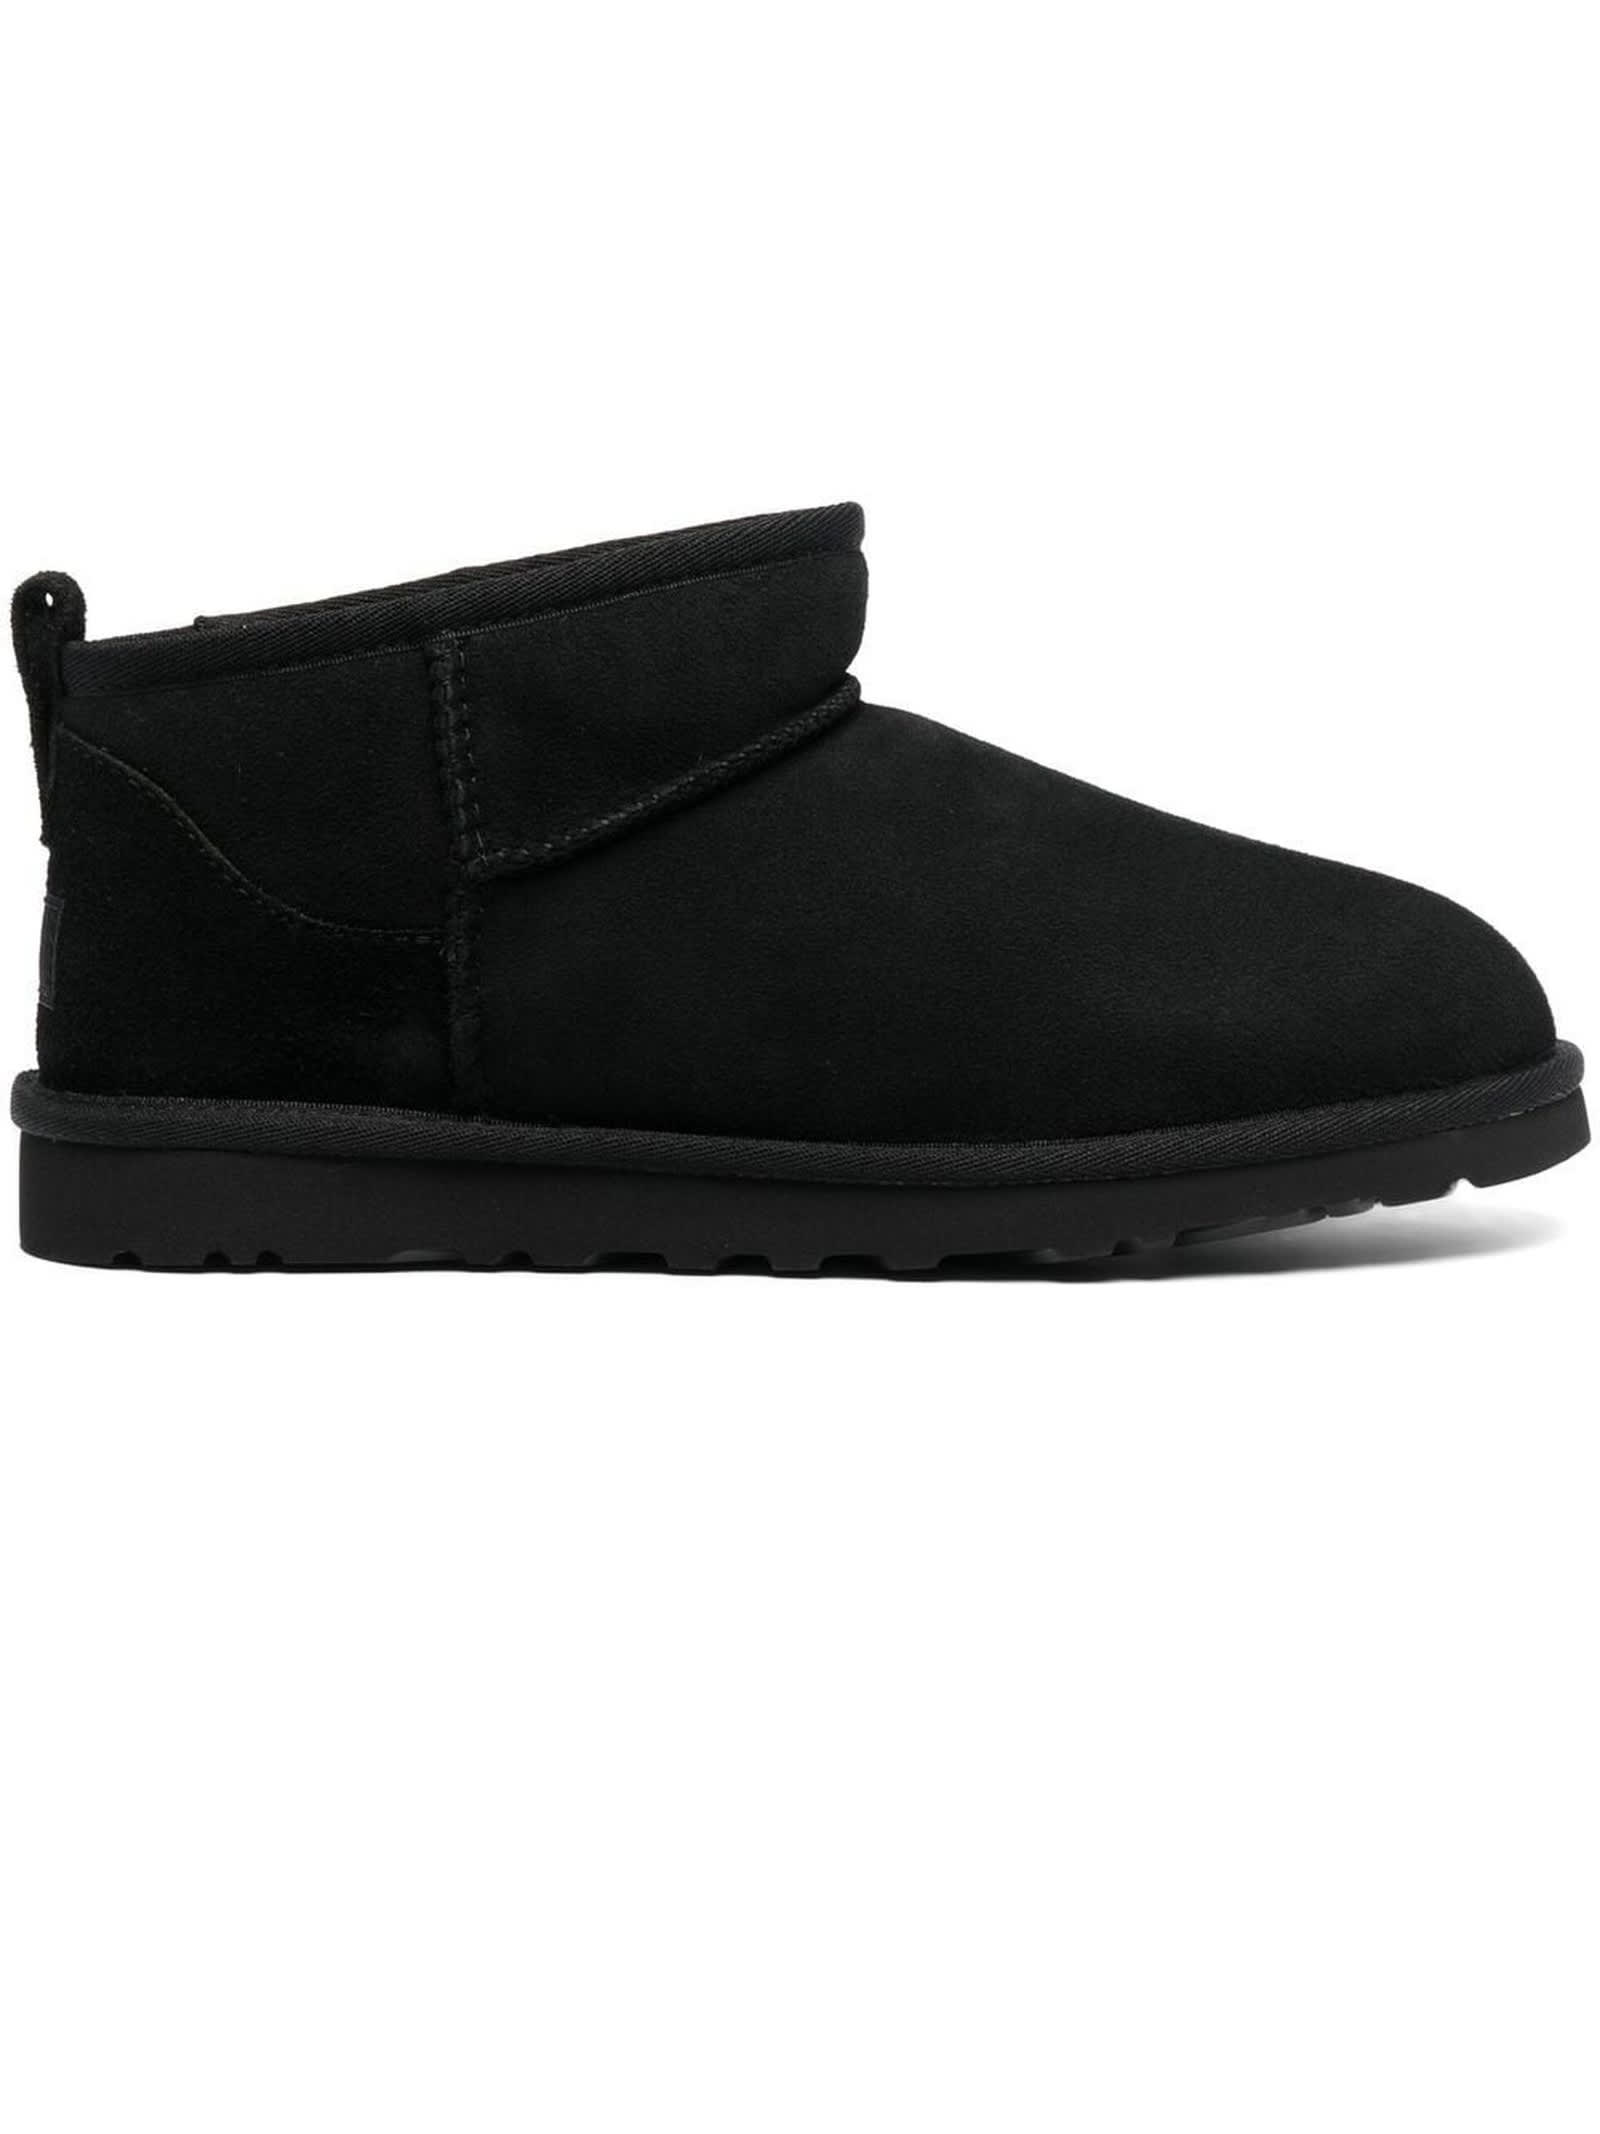 UGG BLACK ULTRA MINI SUEDE BOOTS